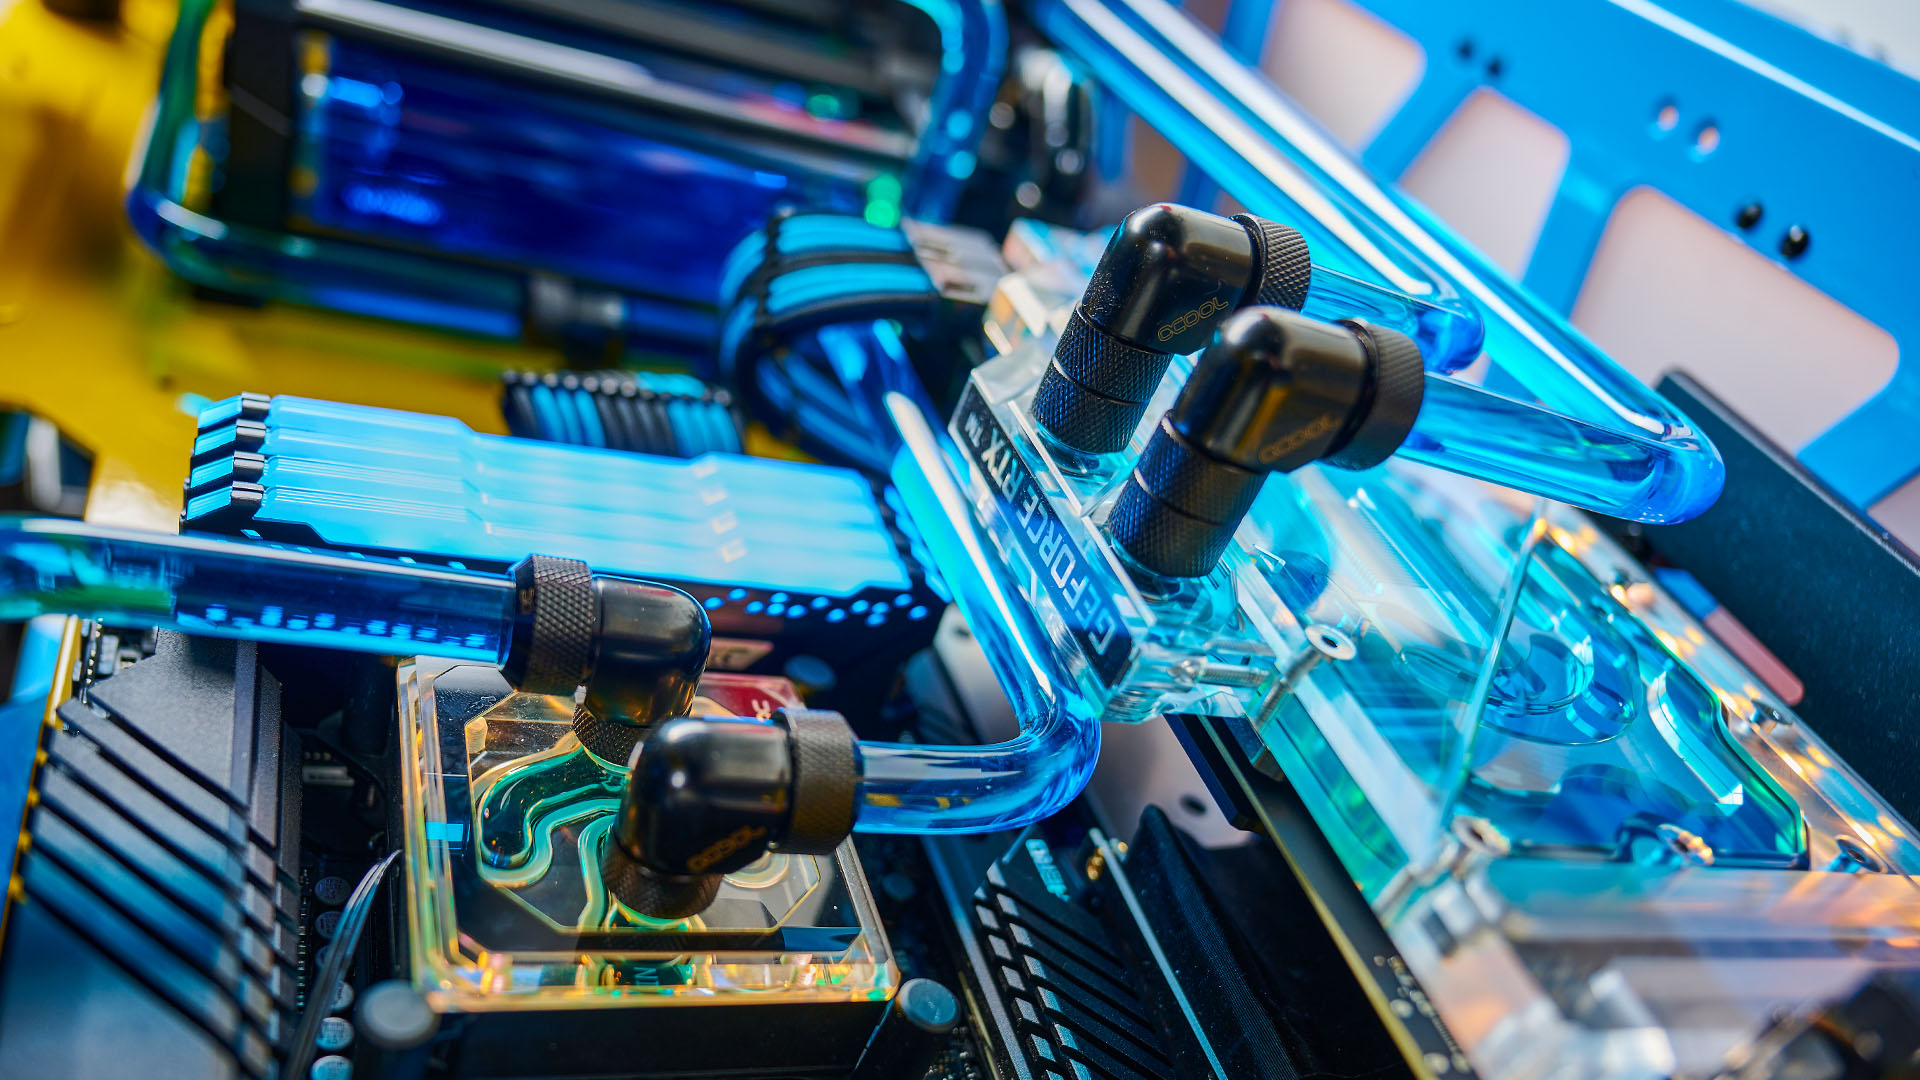 The water-cooling system inside the Intel Gamer Days gaming PC